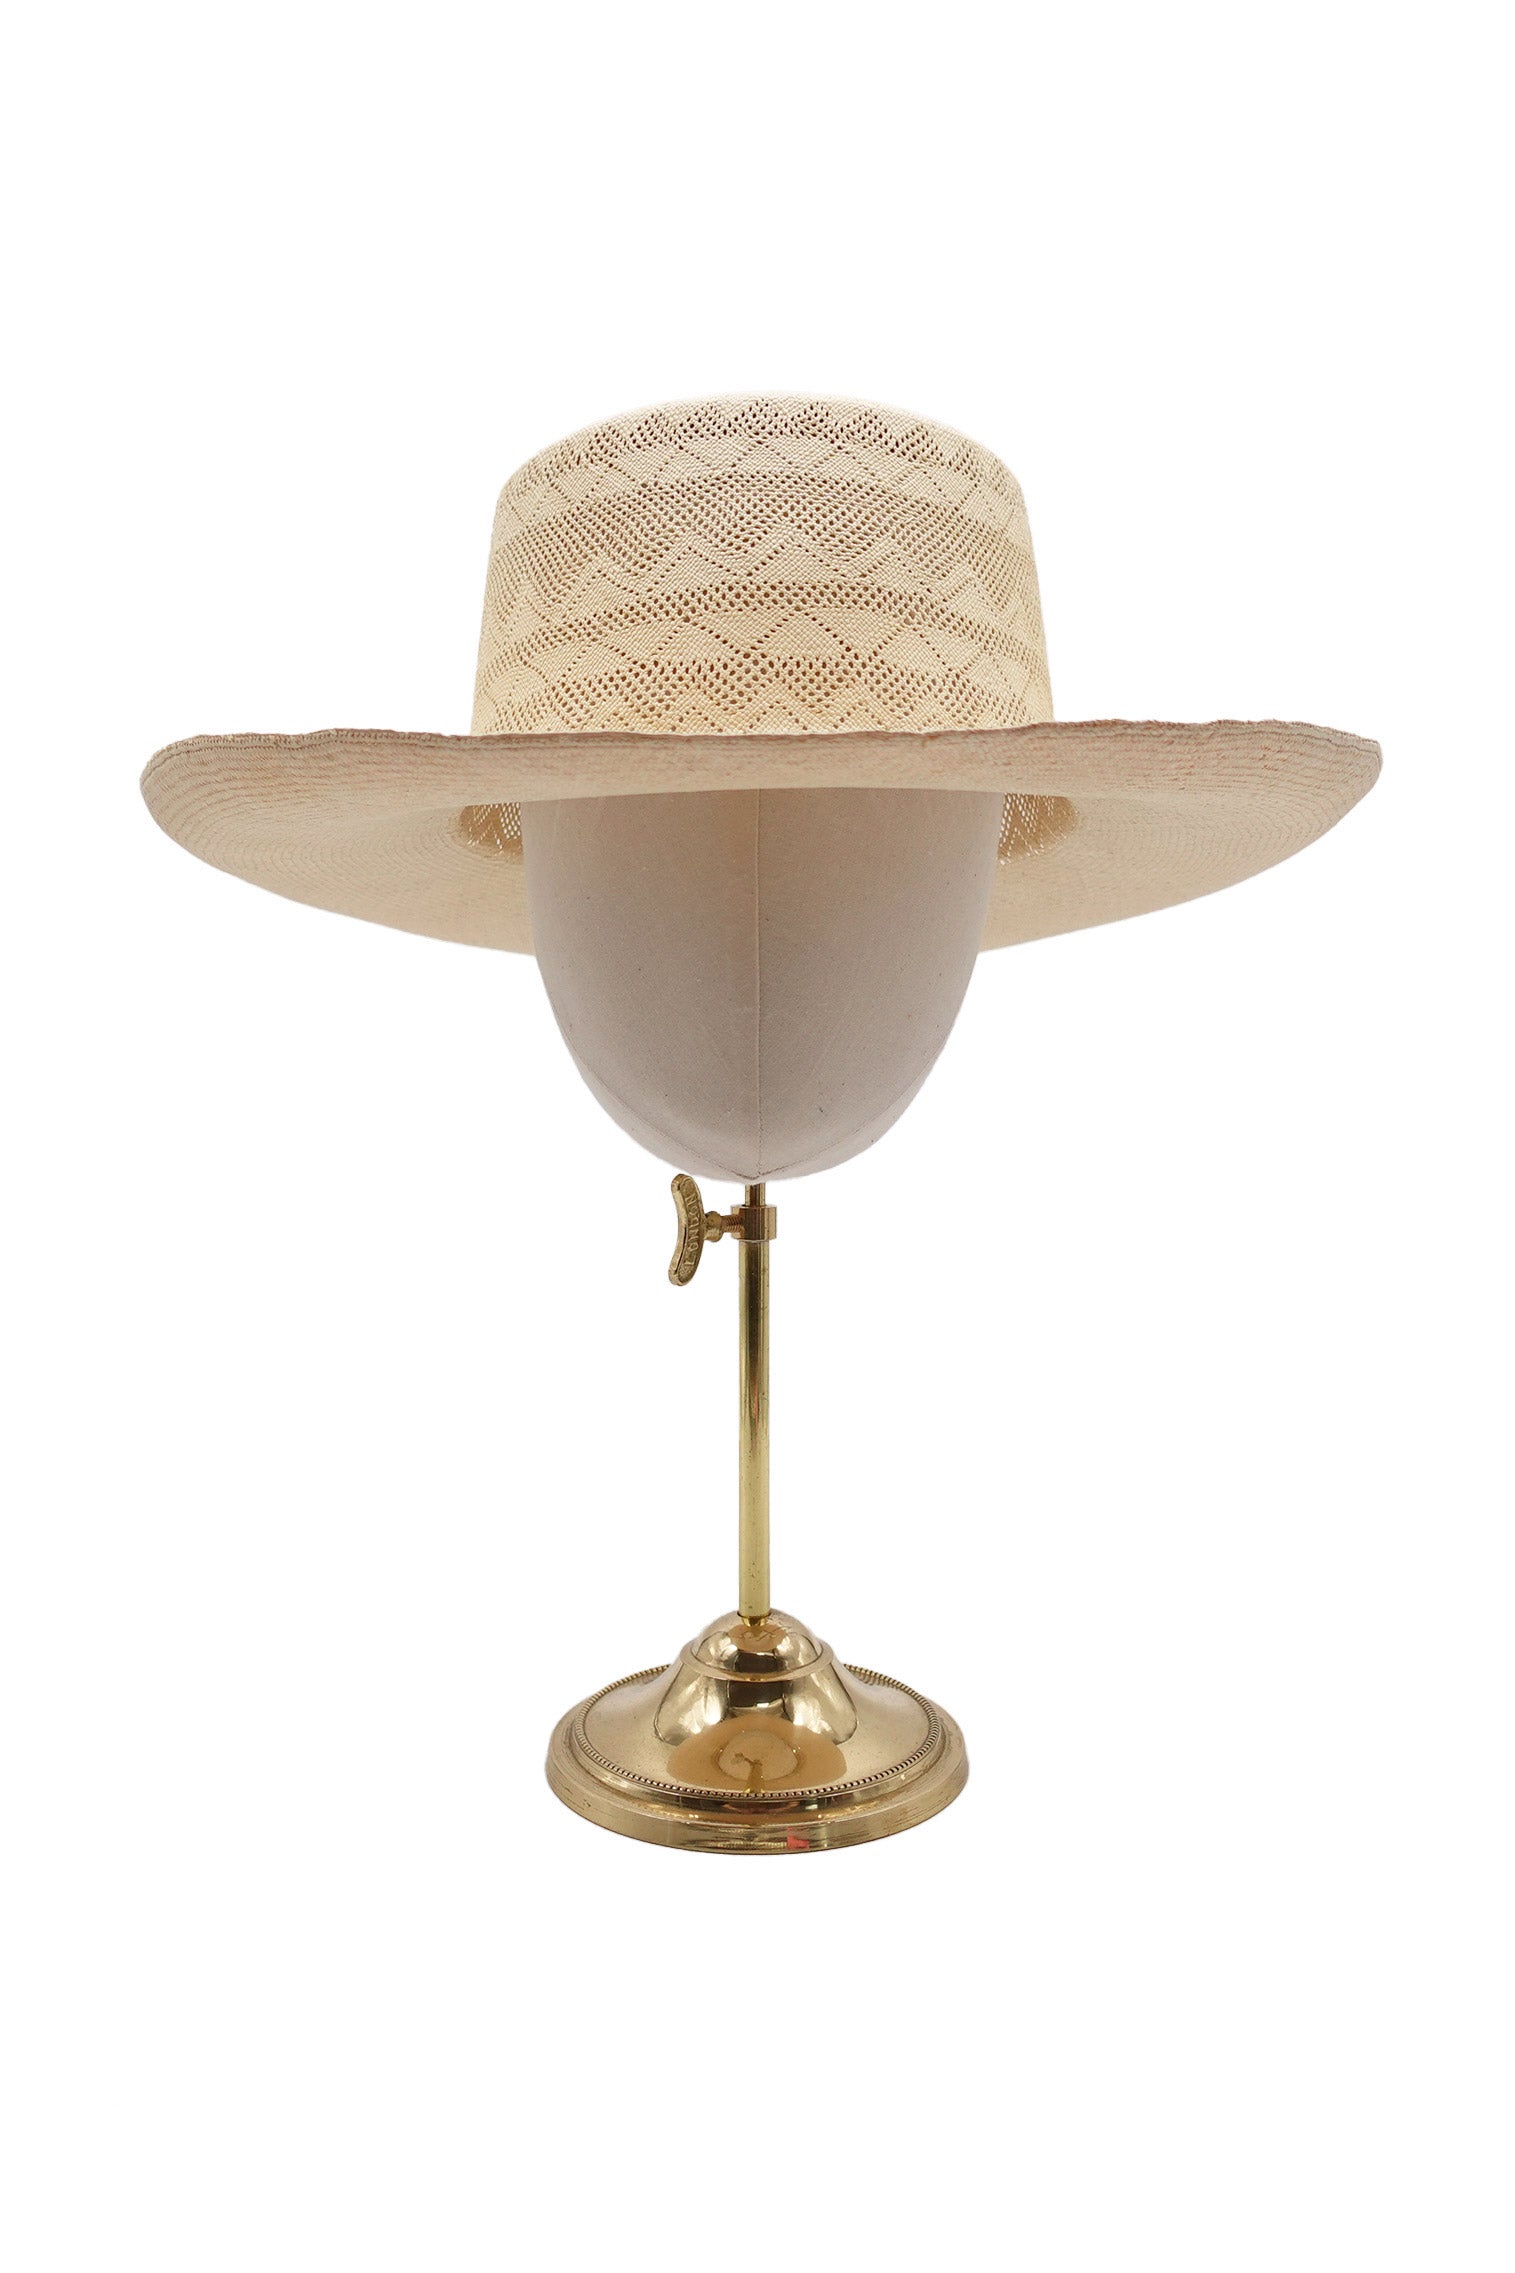 Nell Woven Panama - The Bespoke Embroidered Panama Hat Collection - Lock & Co. Hatters London UK